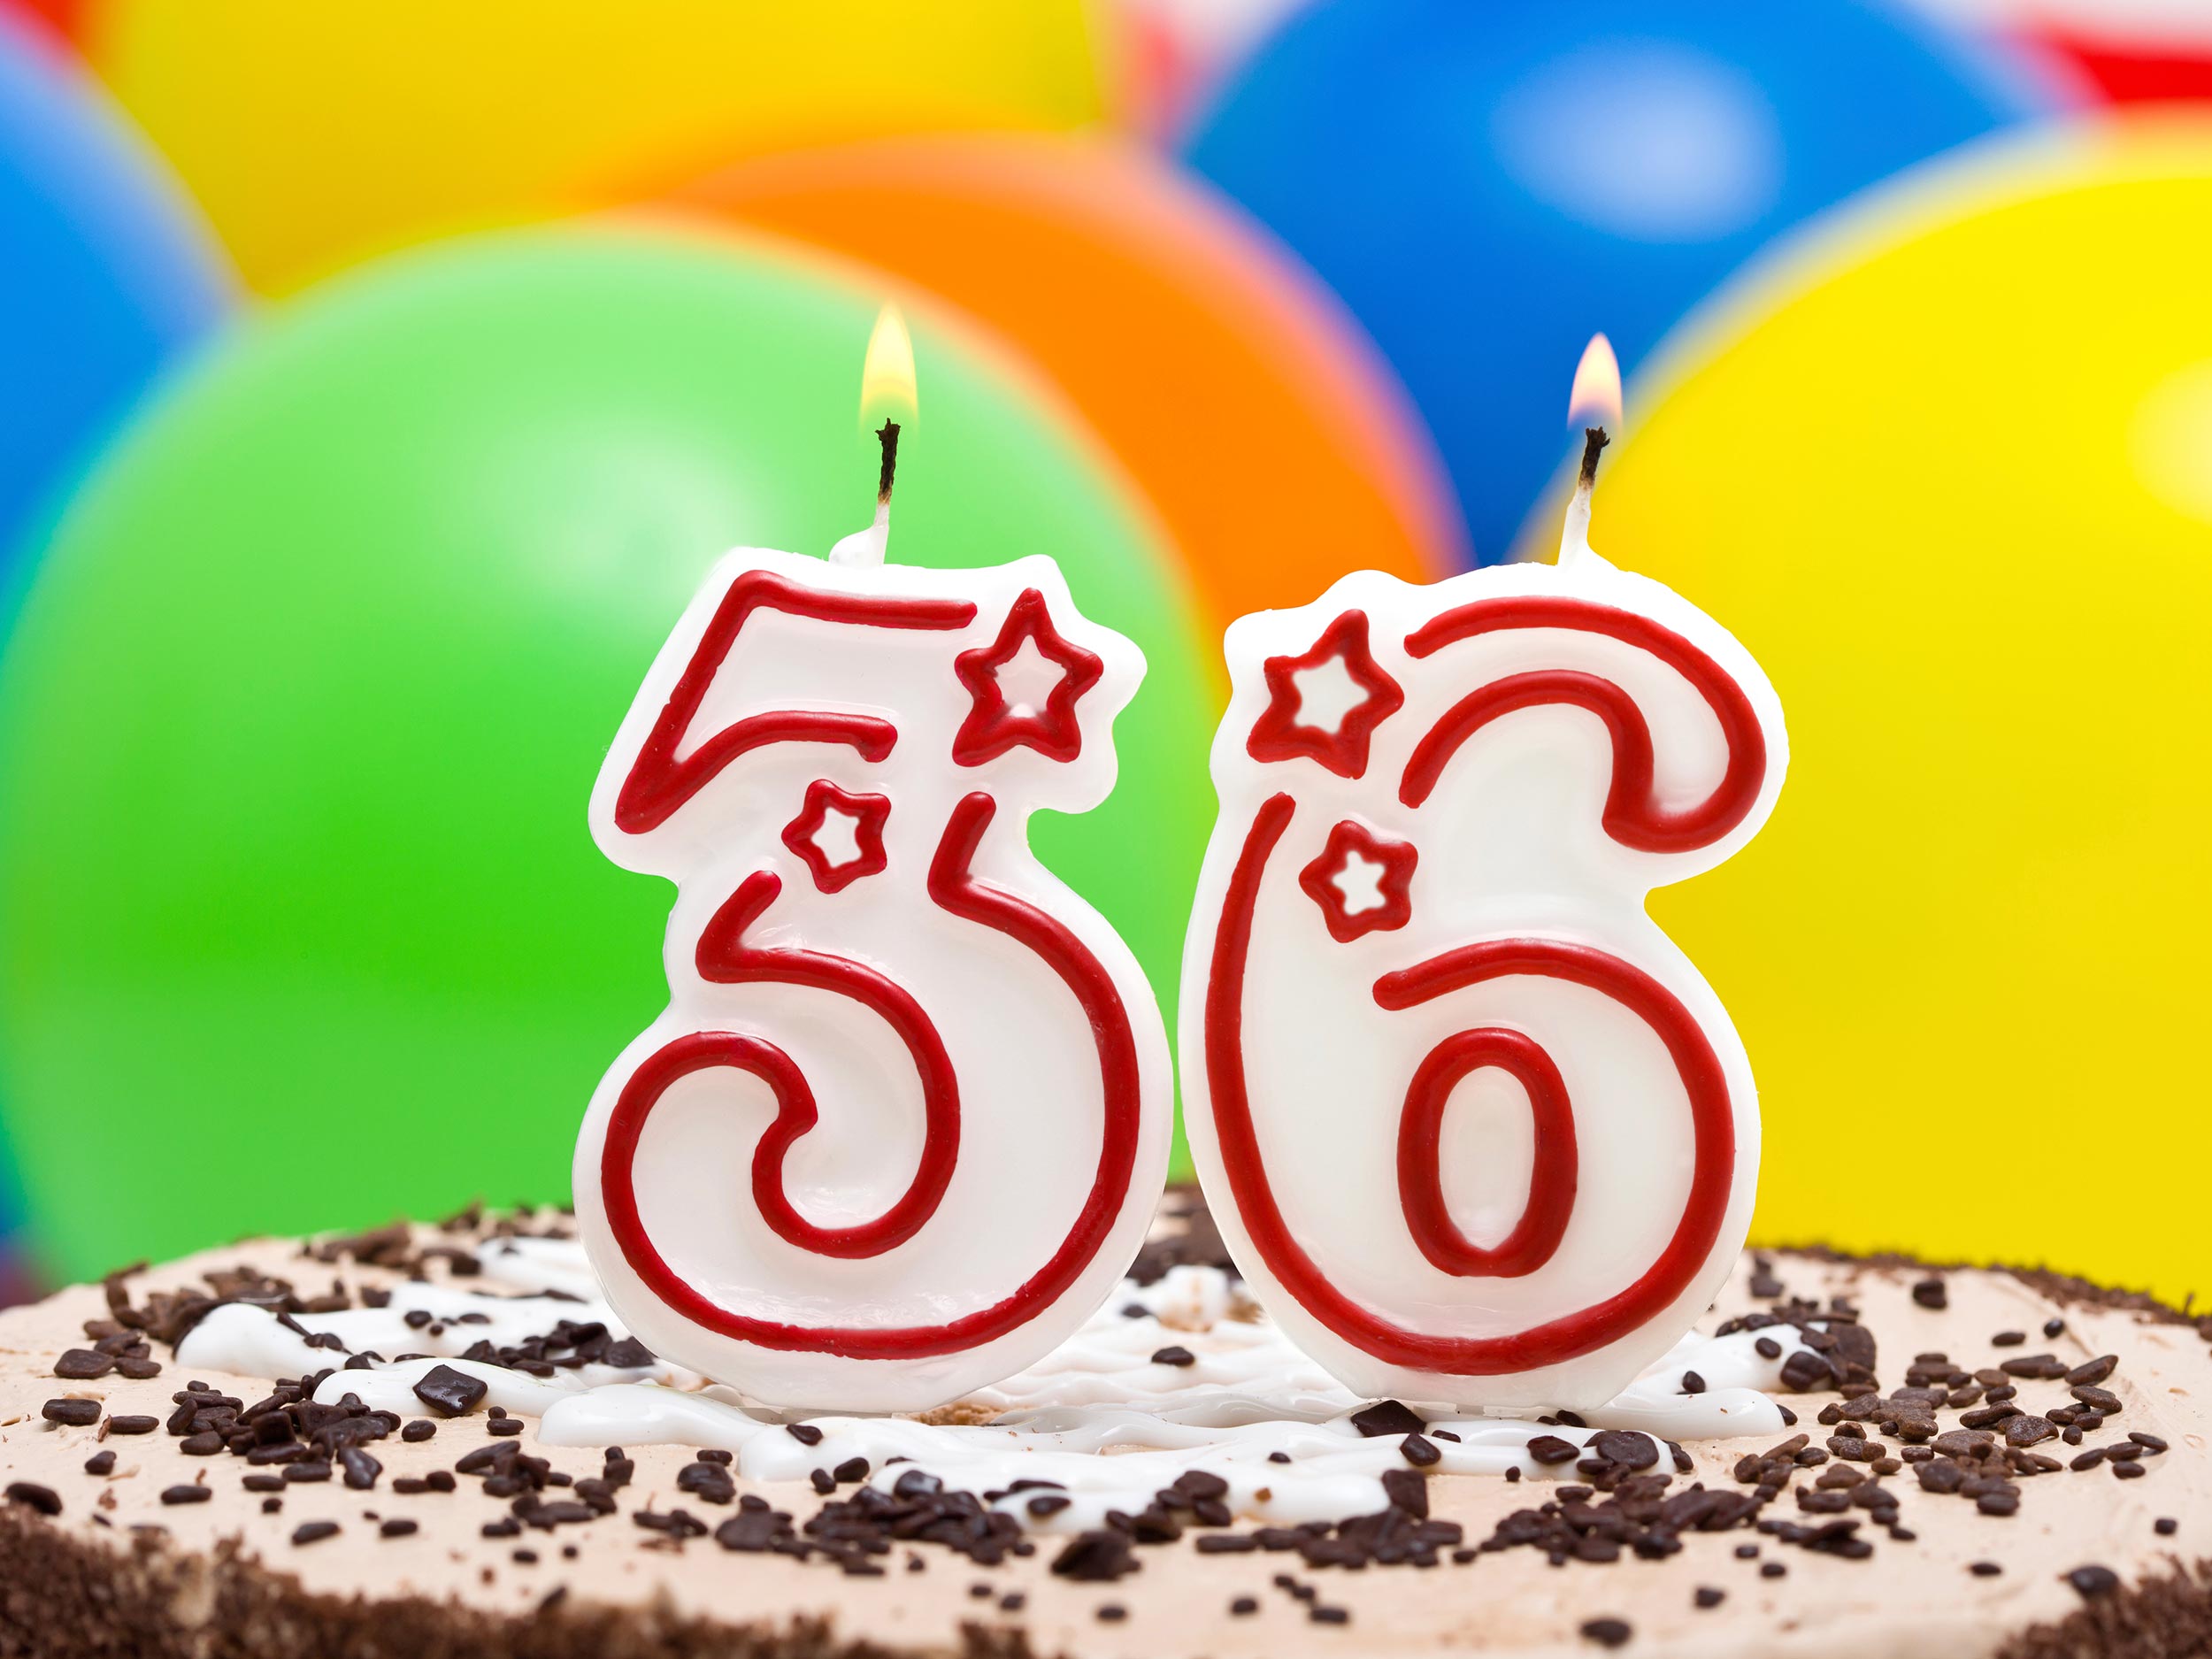 British people think ideal age is 36, survey finds | The